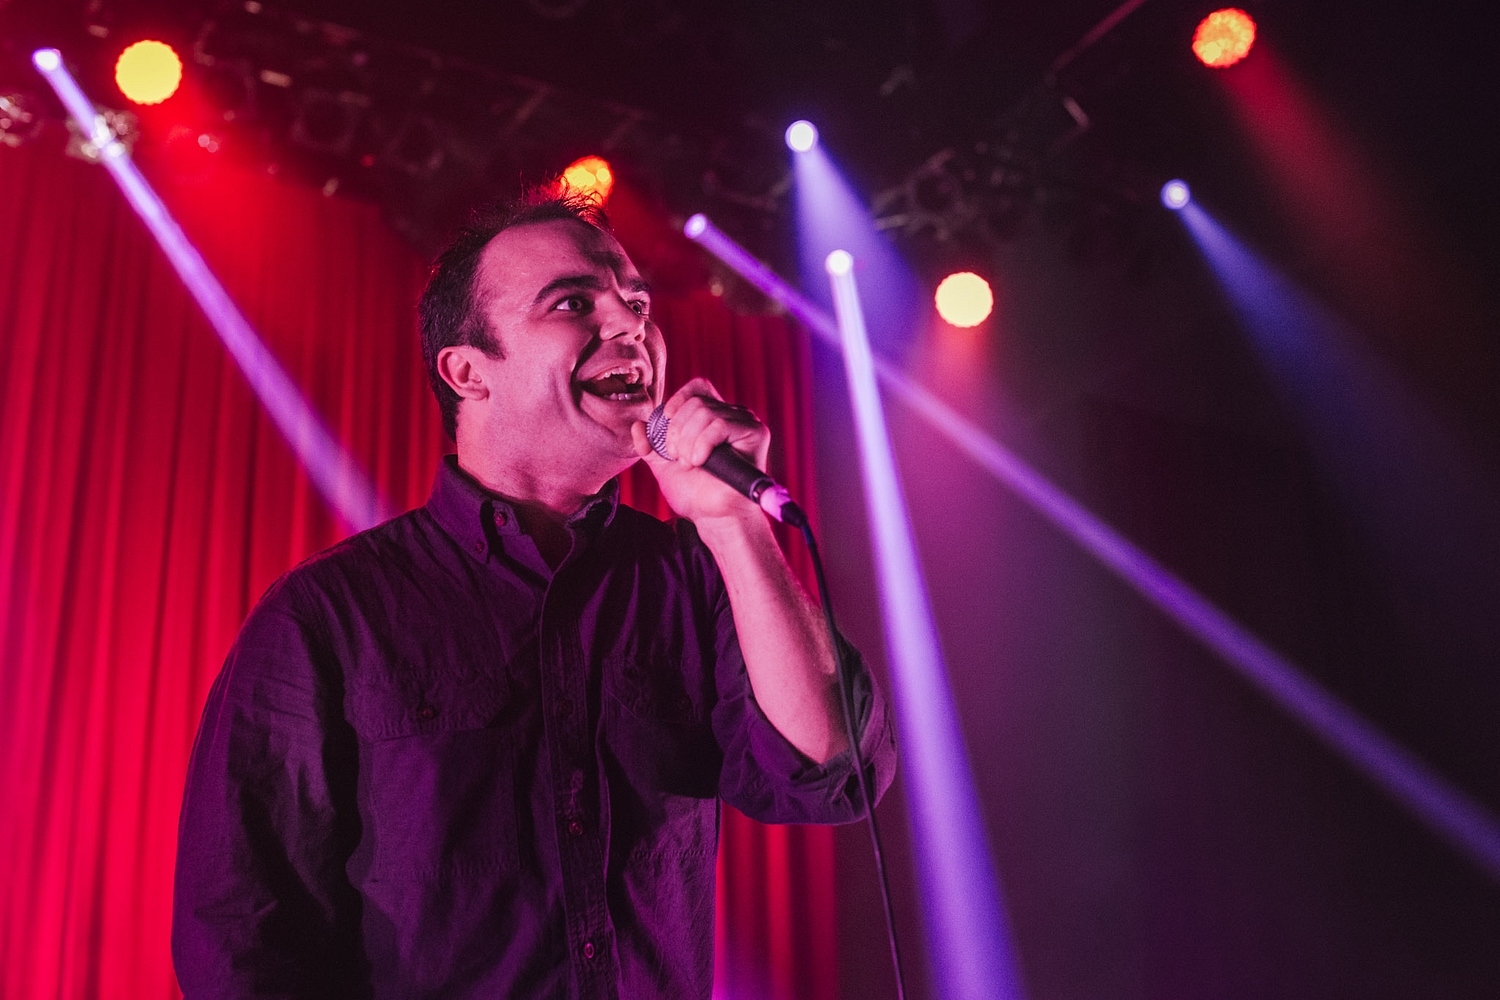 BADBADNOTGOOD flip the book with new remix of Future Islands